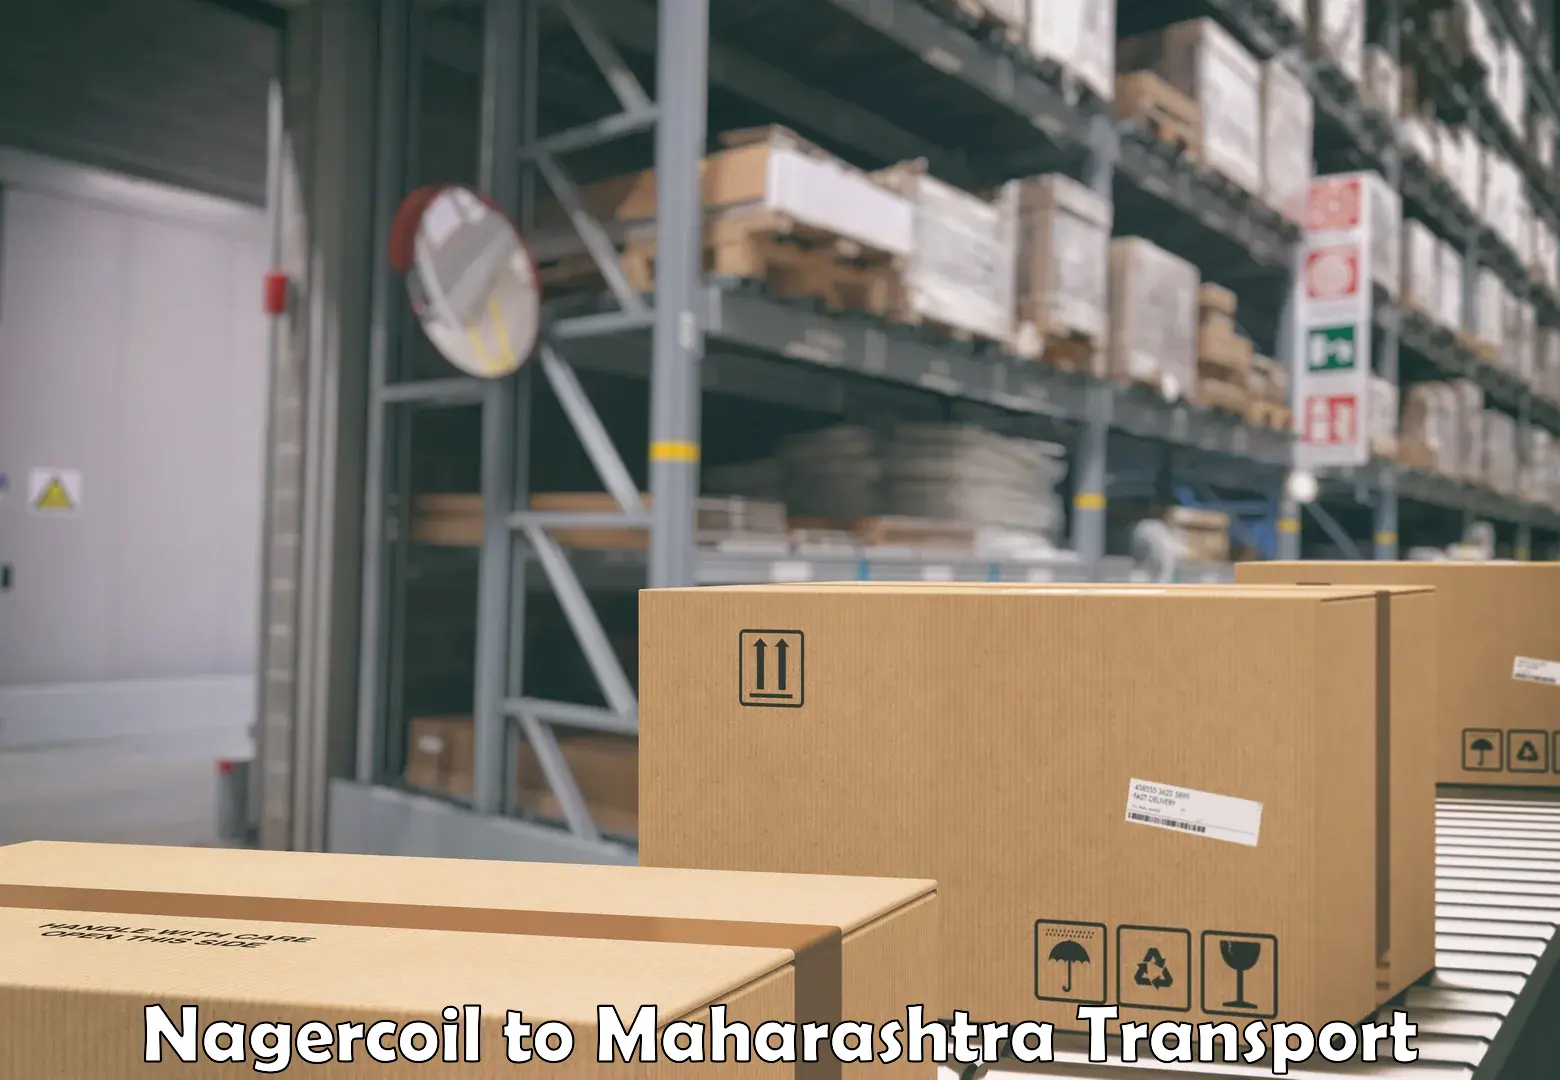 Truck transport companies in India Nagercoil to Gadchiroli